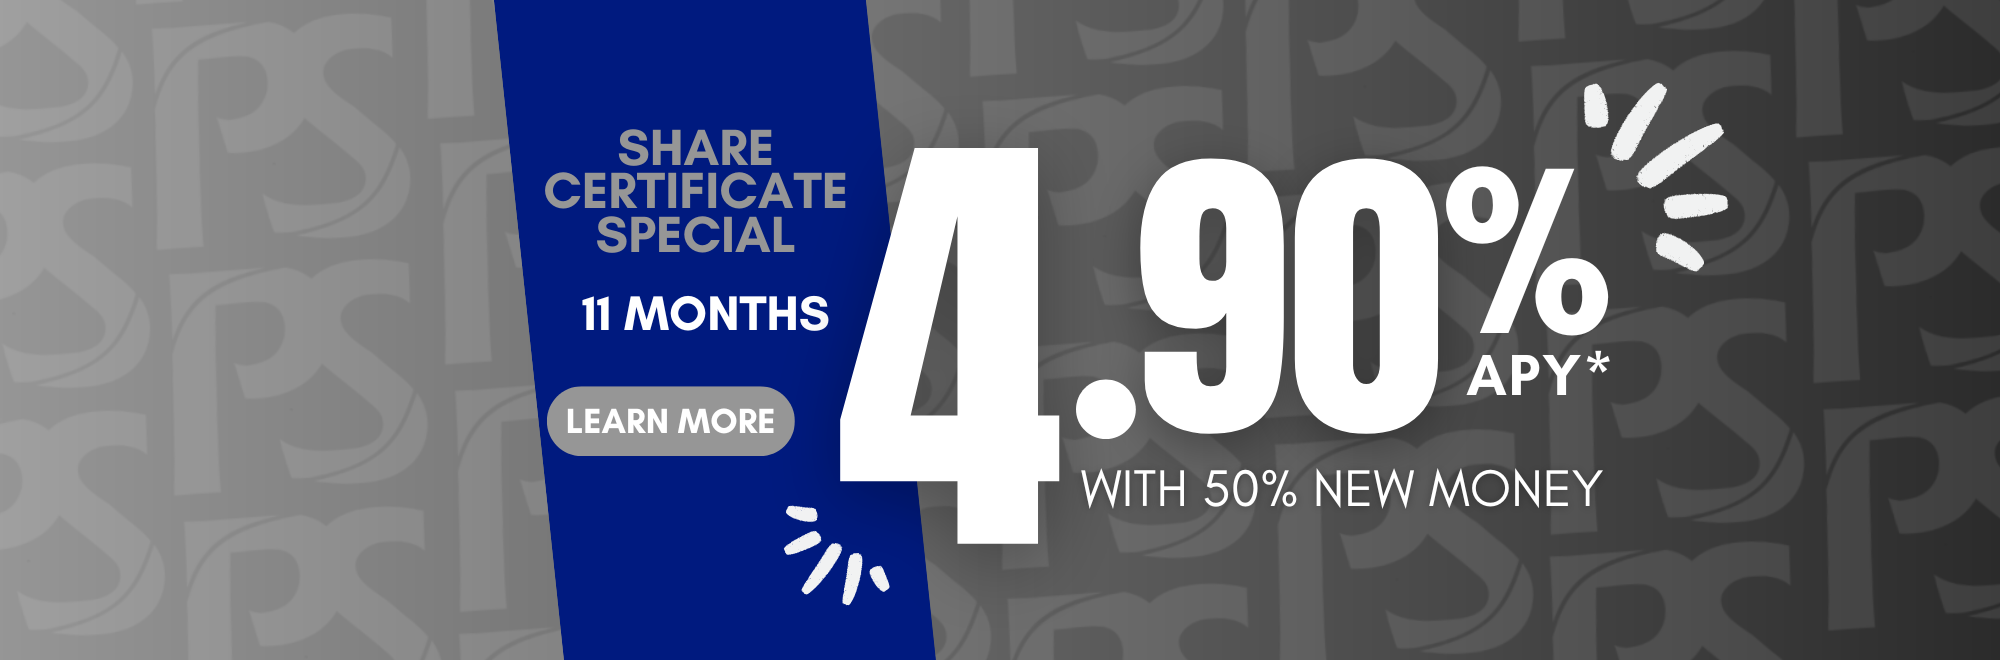 Share Certificate Special 11 months 4.90%APY with 50% new money. Click to learn more